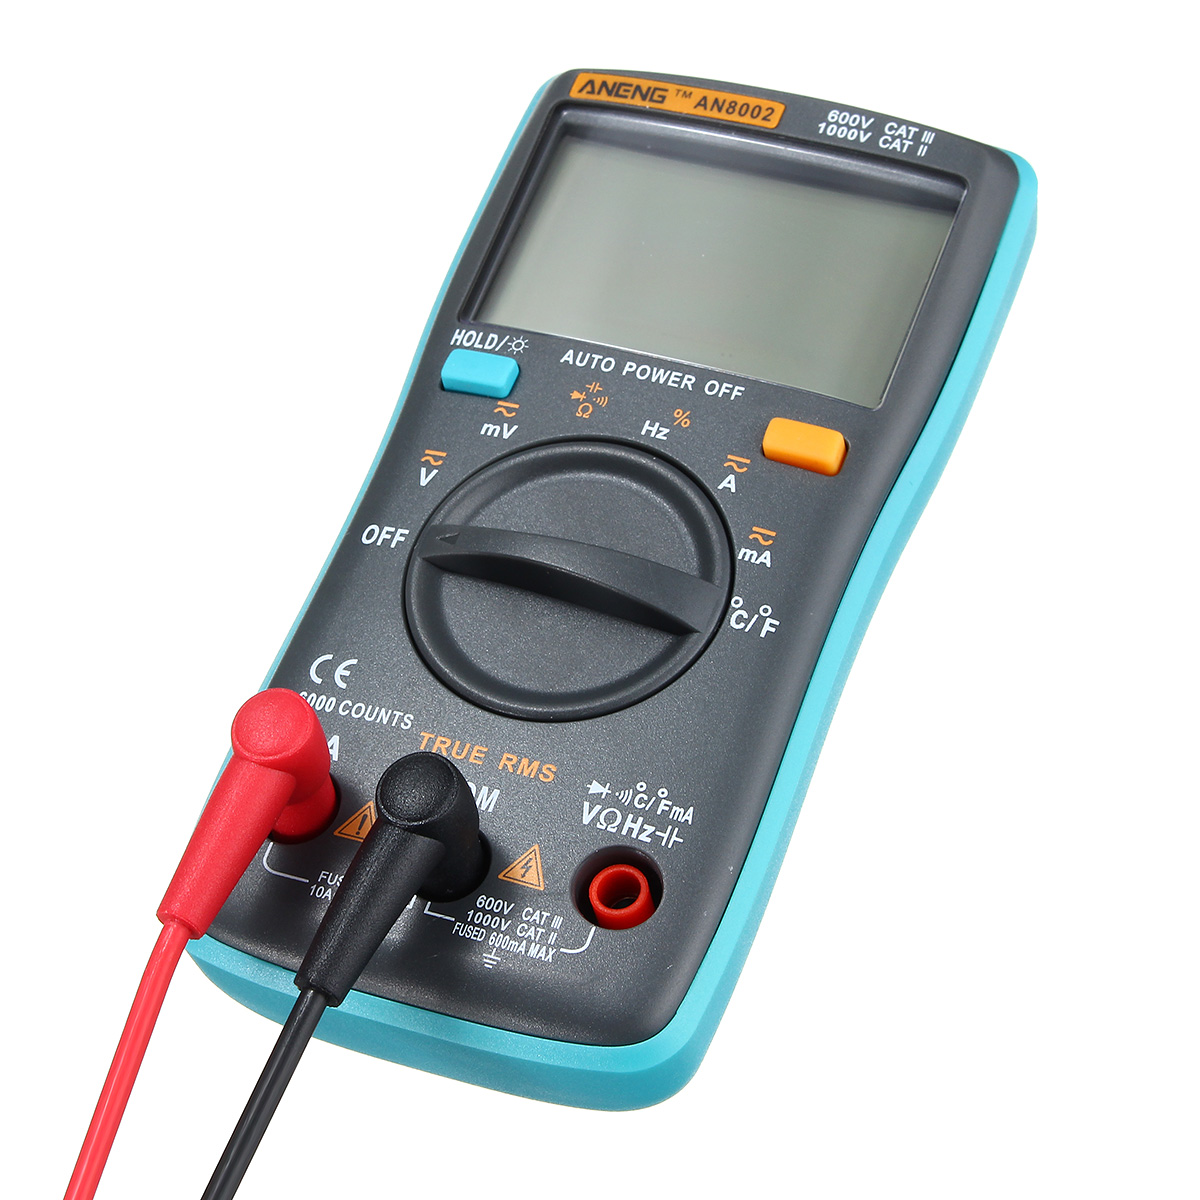 ANENG AN8002 Digital True RMS 6000 Counts Multimeter AC/DC Current Voltage Frequency Resistance Temperature Tester ℃/℉ 17